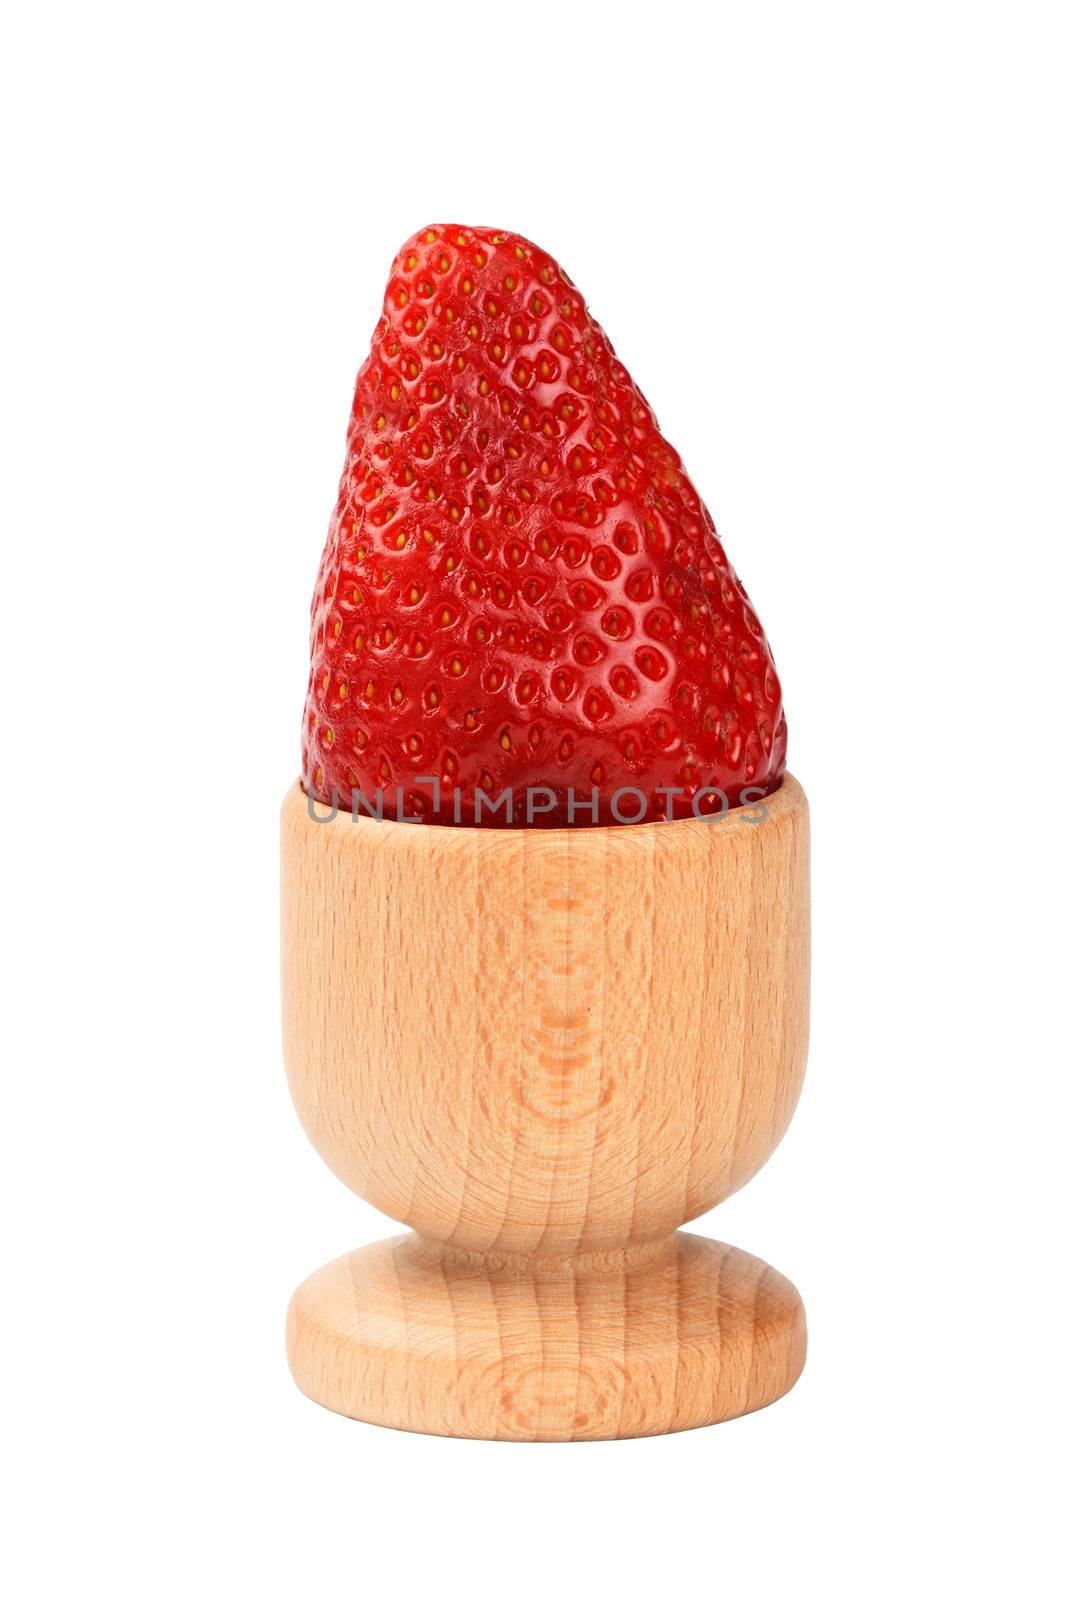 One big red mellow strawberry in wooden eggcup holder isolated on white background